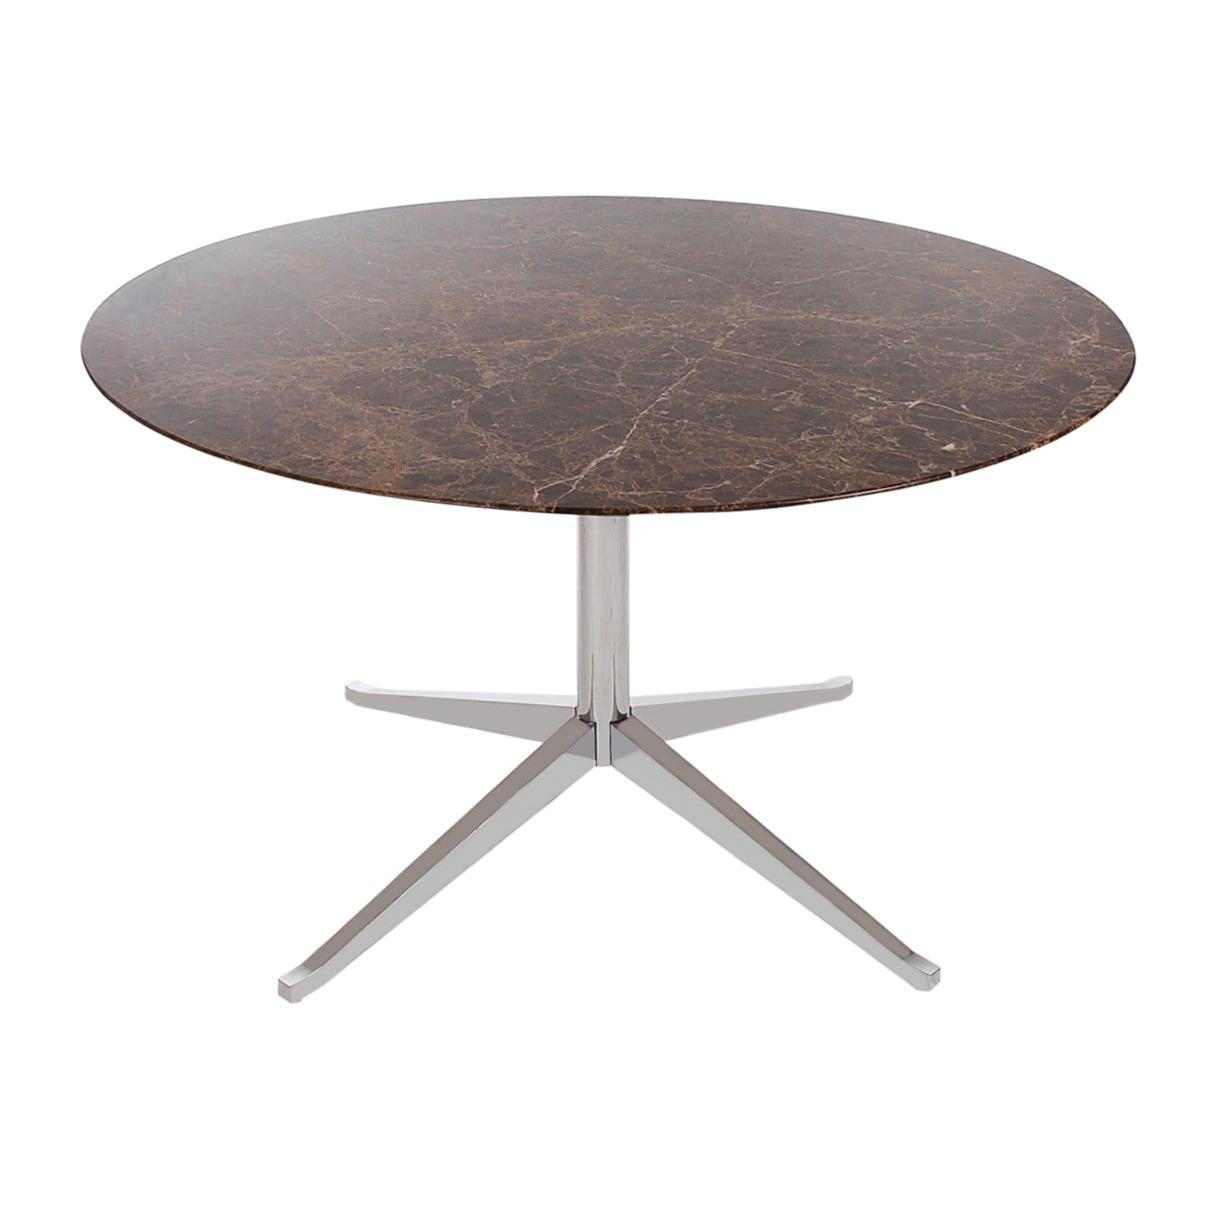 Mid-Century Modern Round Marble Dining Table or Desk by Florence Knoll for Knoll